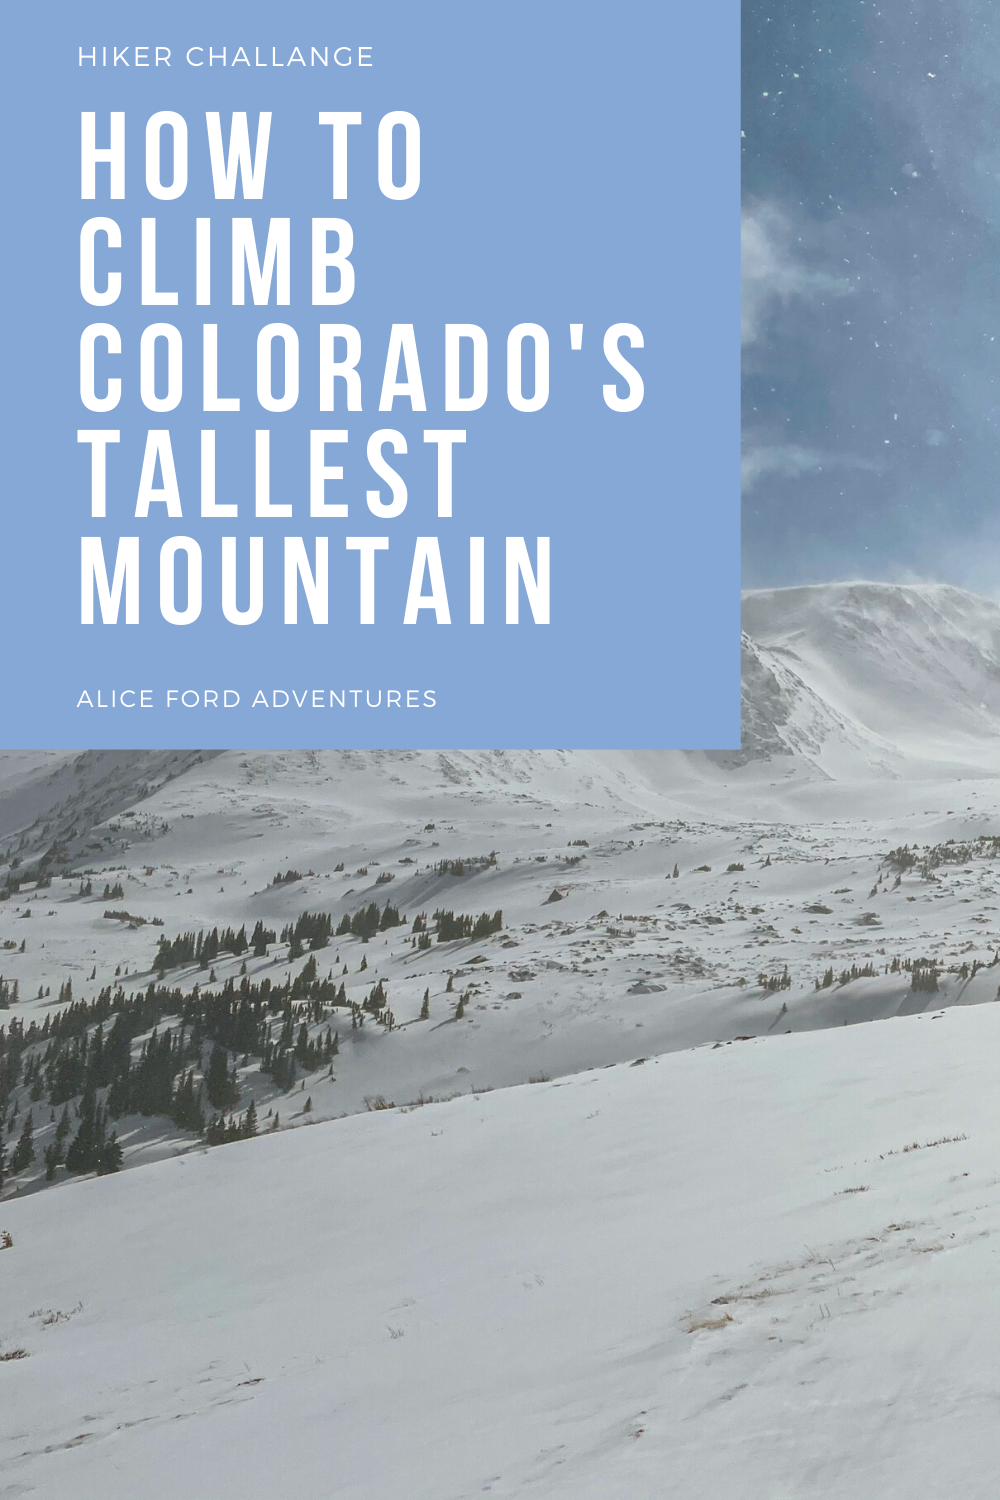 HIking Colorados tallest mountain Mt Elbert in winter. Tips and trail information for a succesful hike #hiking #colorado 